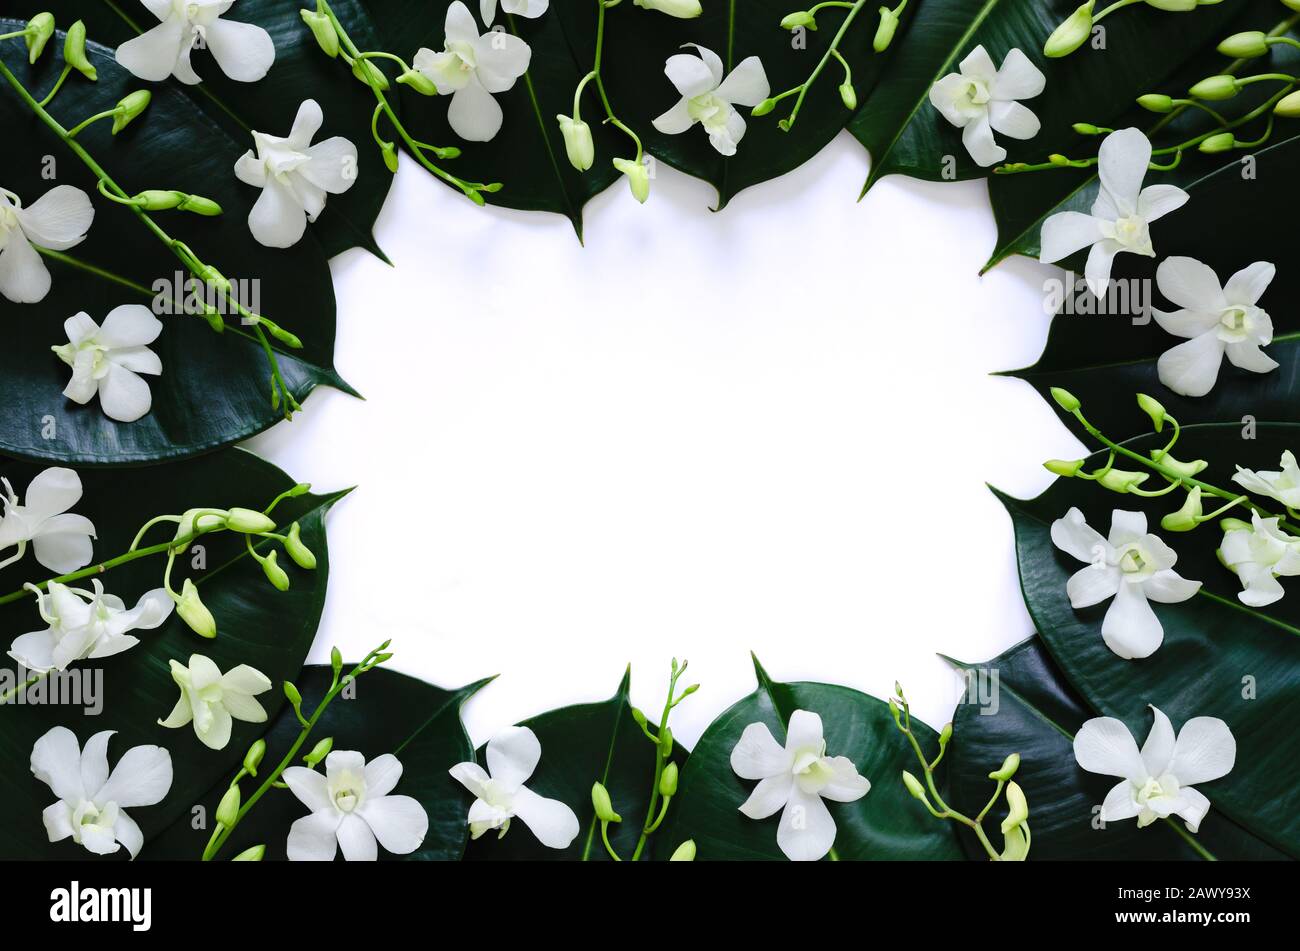 White orchid flowers put with rubber tree leaves on white background for spring blossom photo concept. Stock Photo